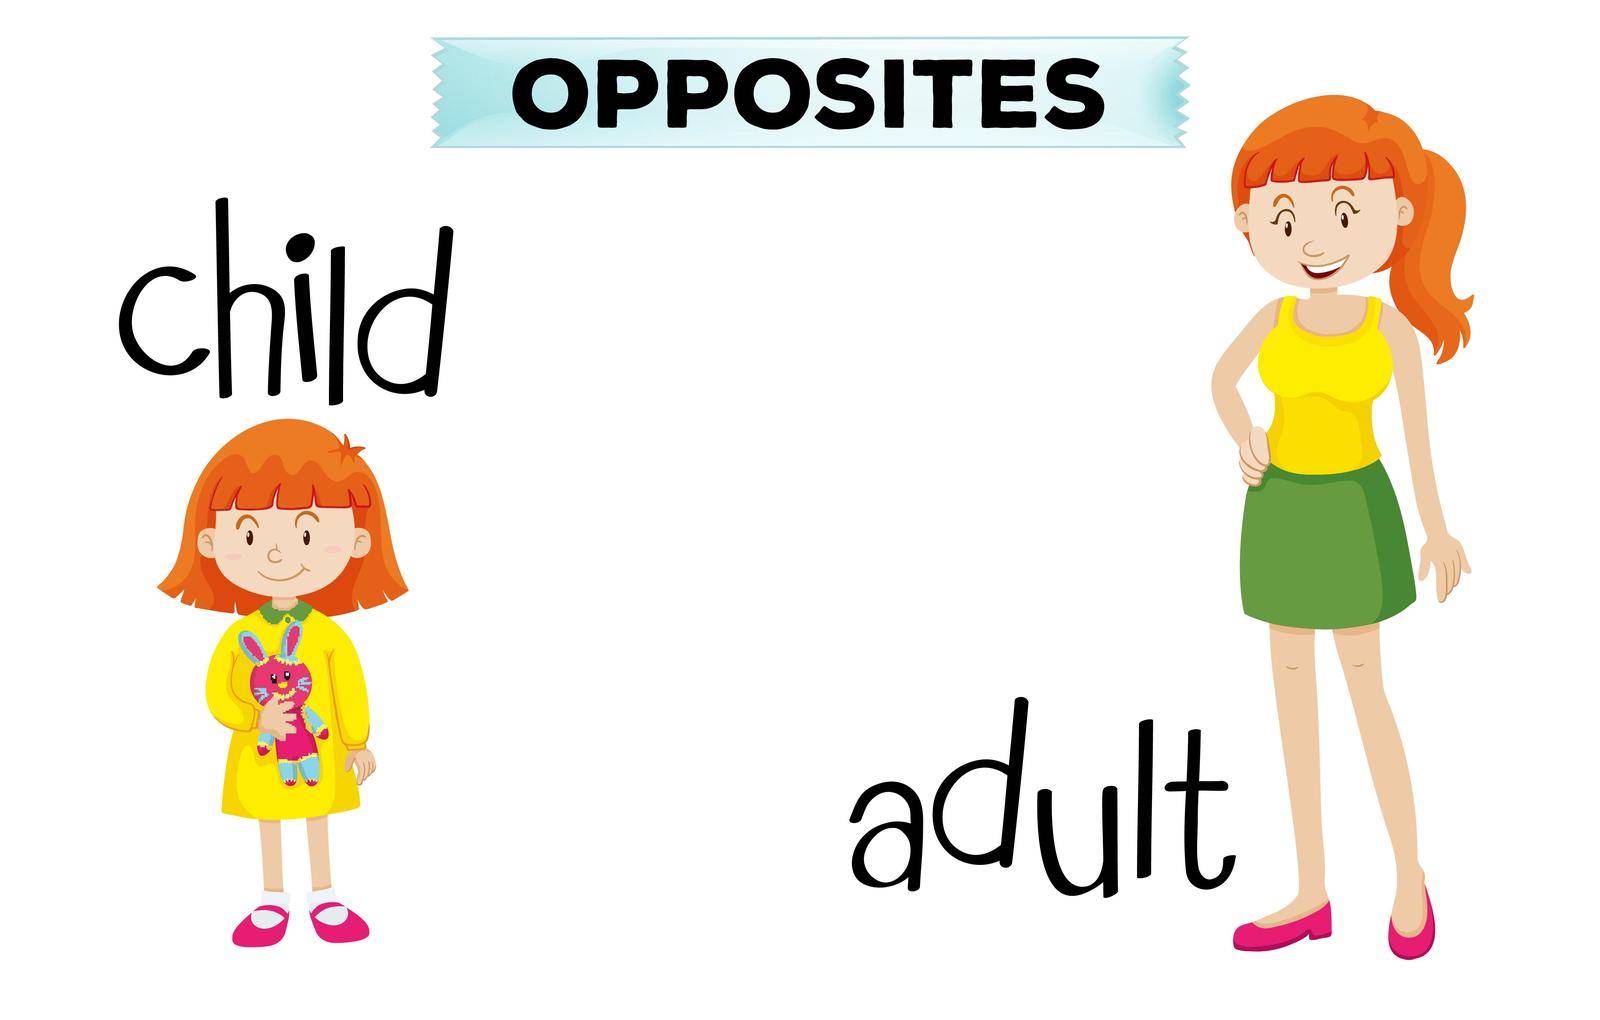 Opposite wordcard with child and adult by iimages